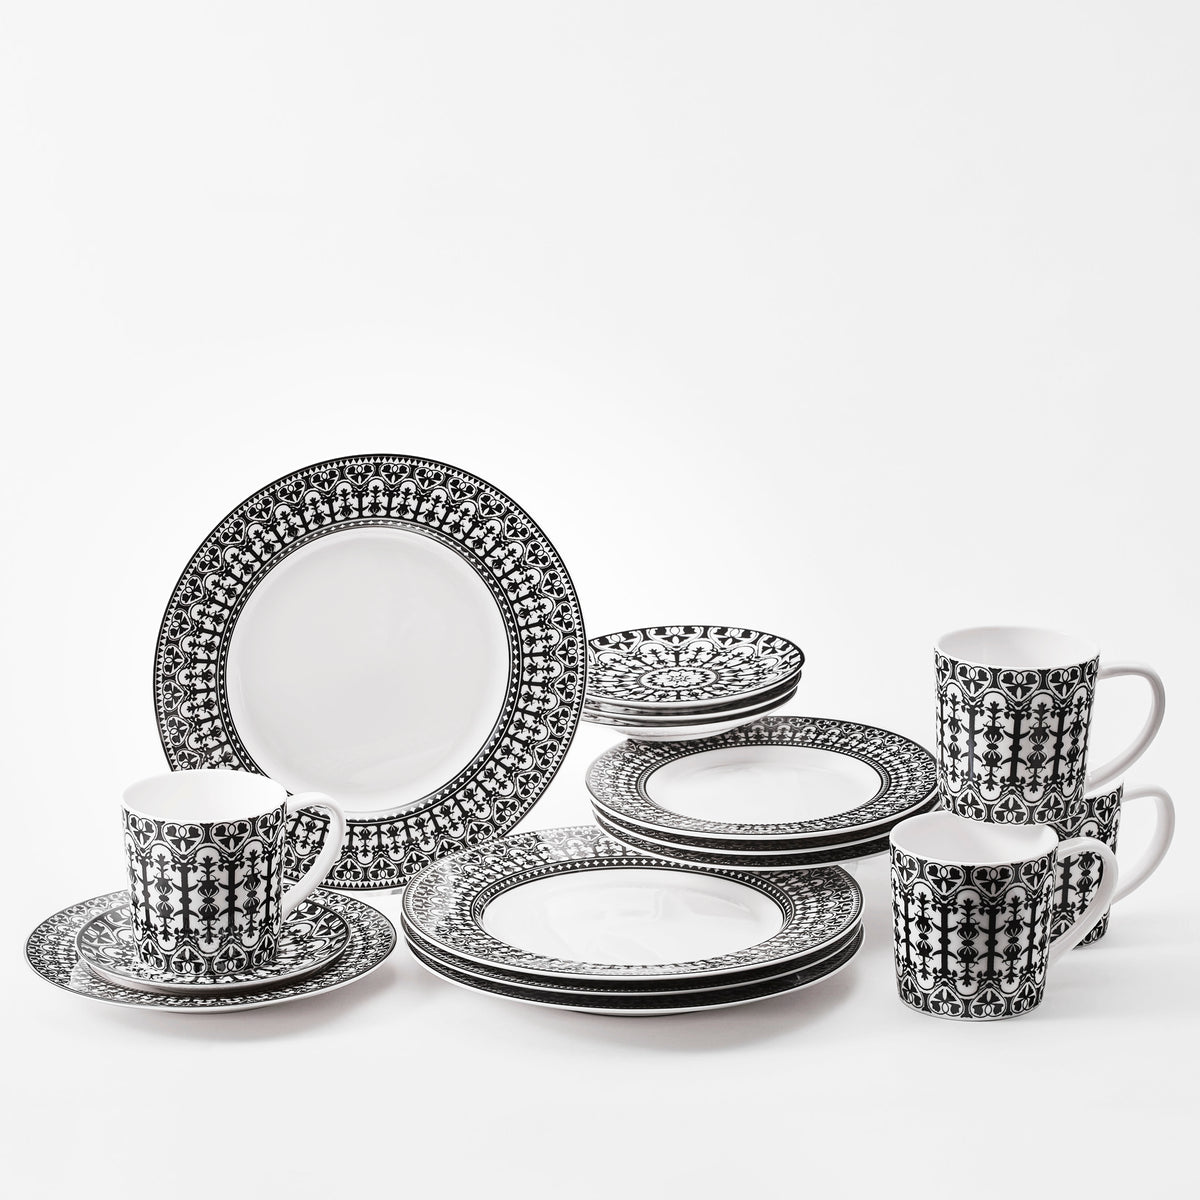 Casablanca Black and White 16 Piece dinnerware set in porcelain from Caskata sets a table for 4.